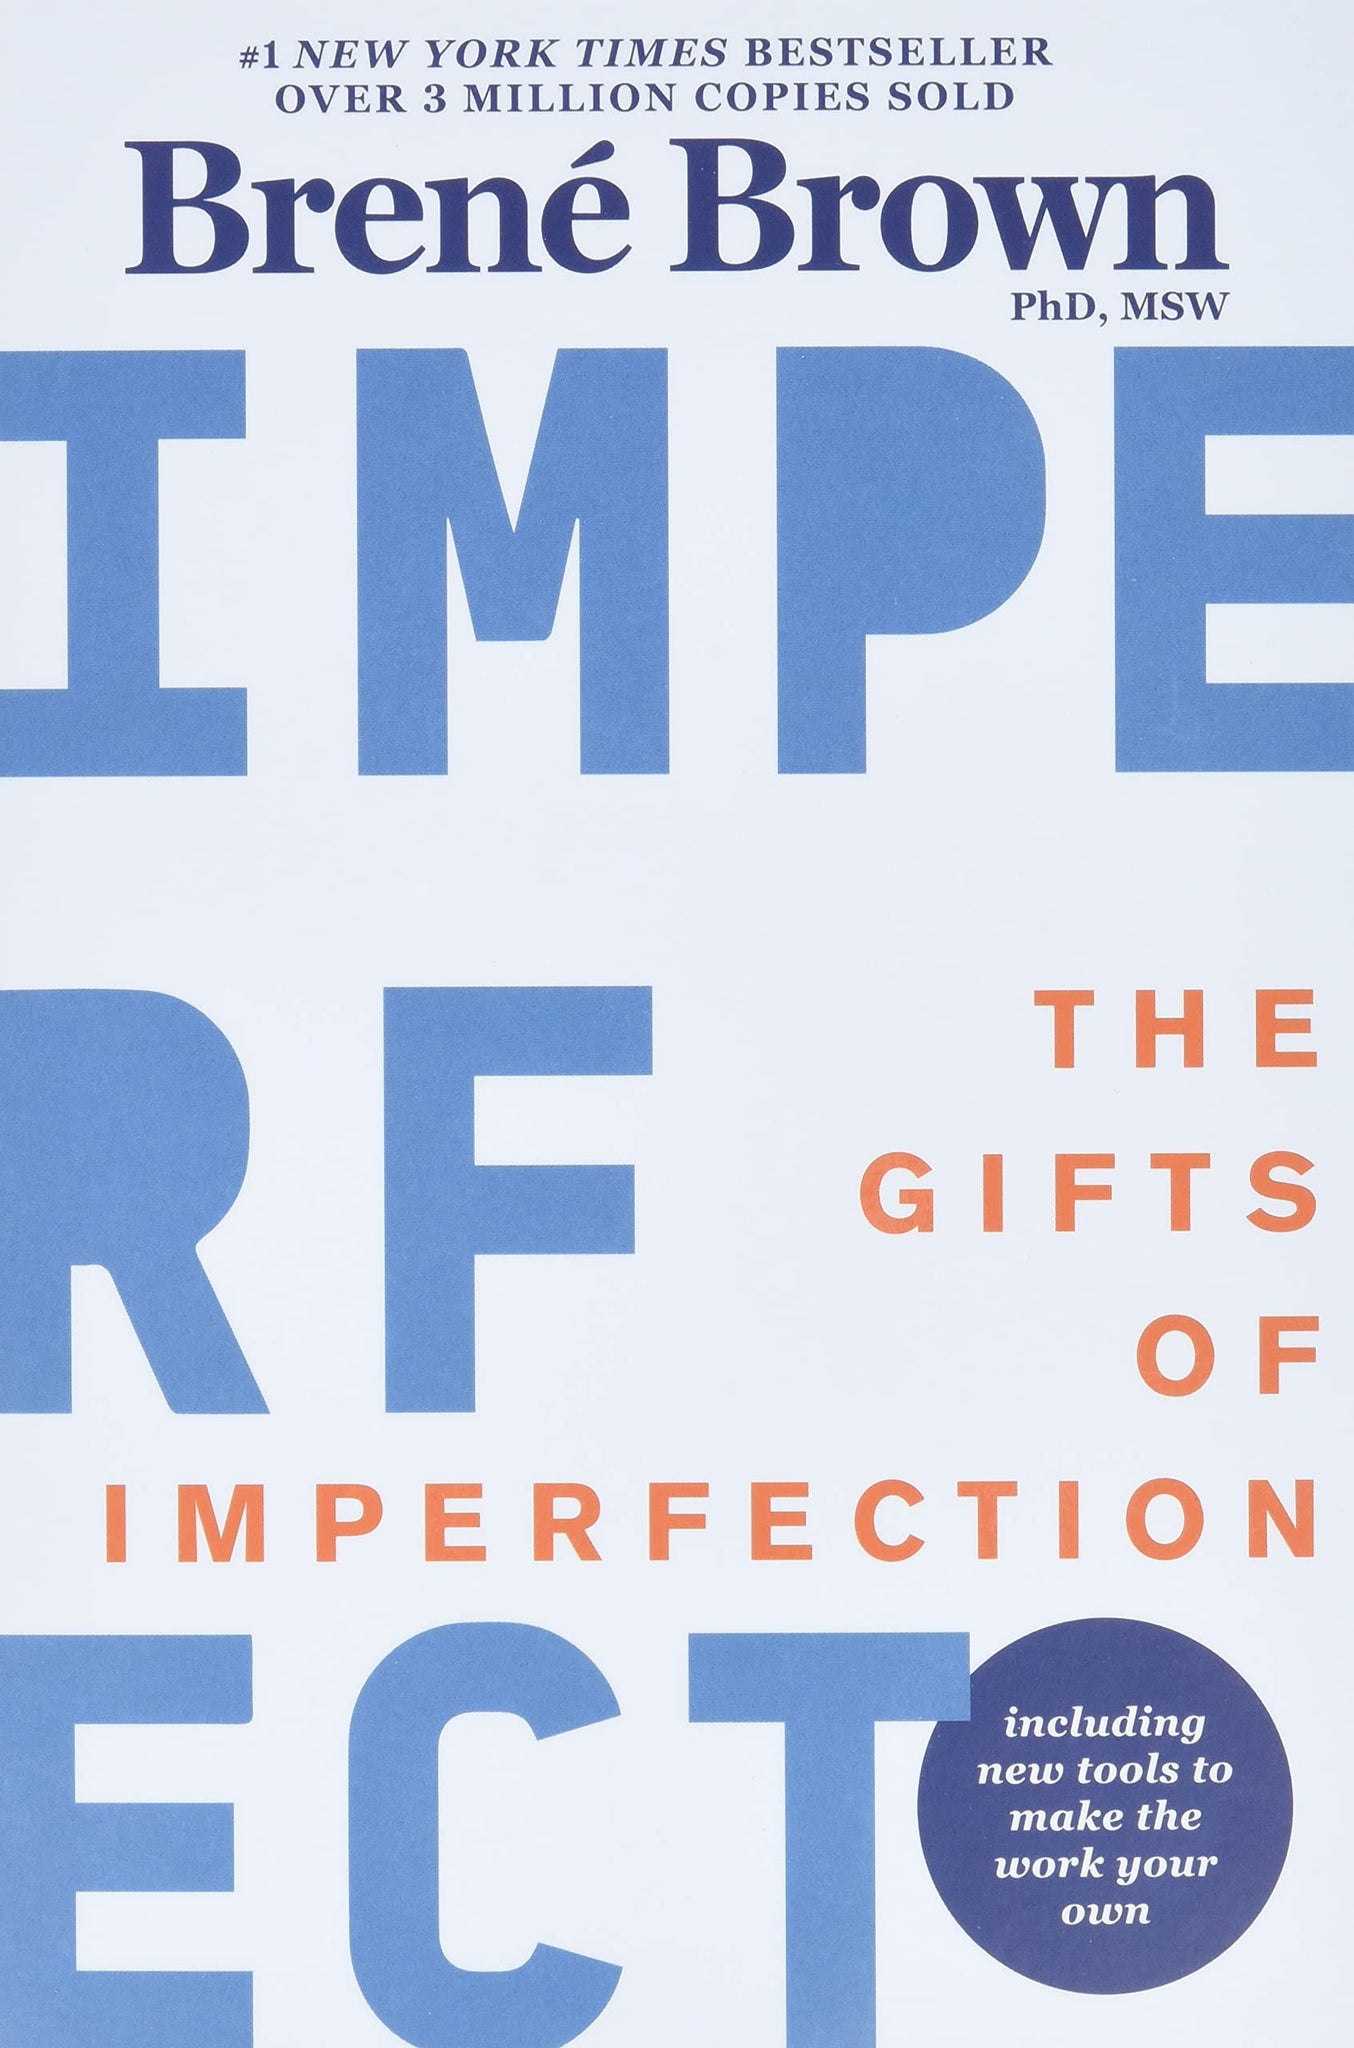 The Gifts of Imperfection (10th Anniversary Edition) by Brene Brown (Softcover)